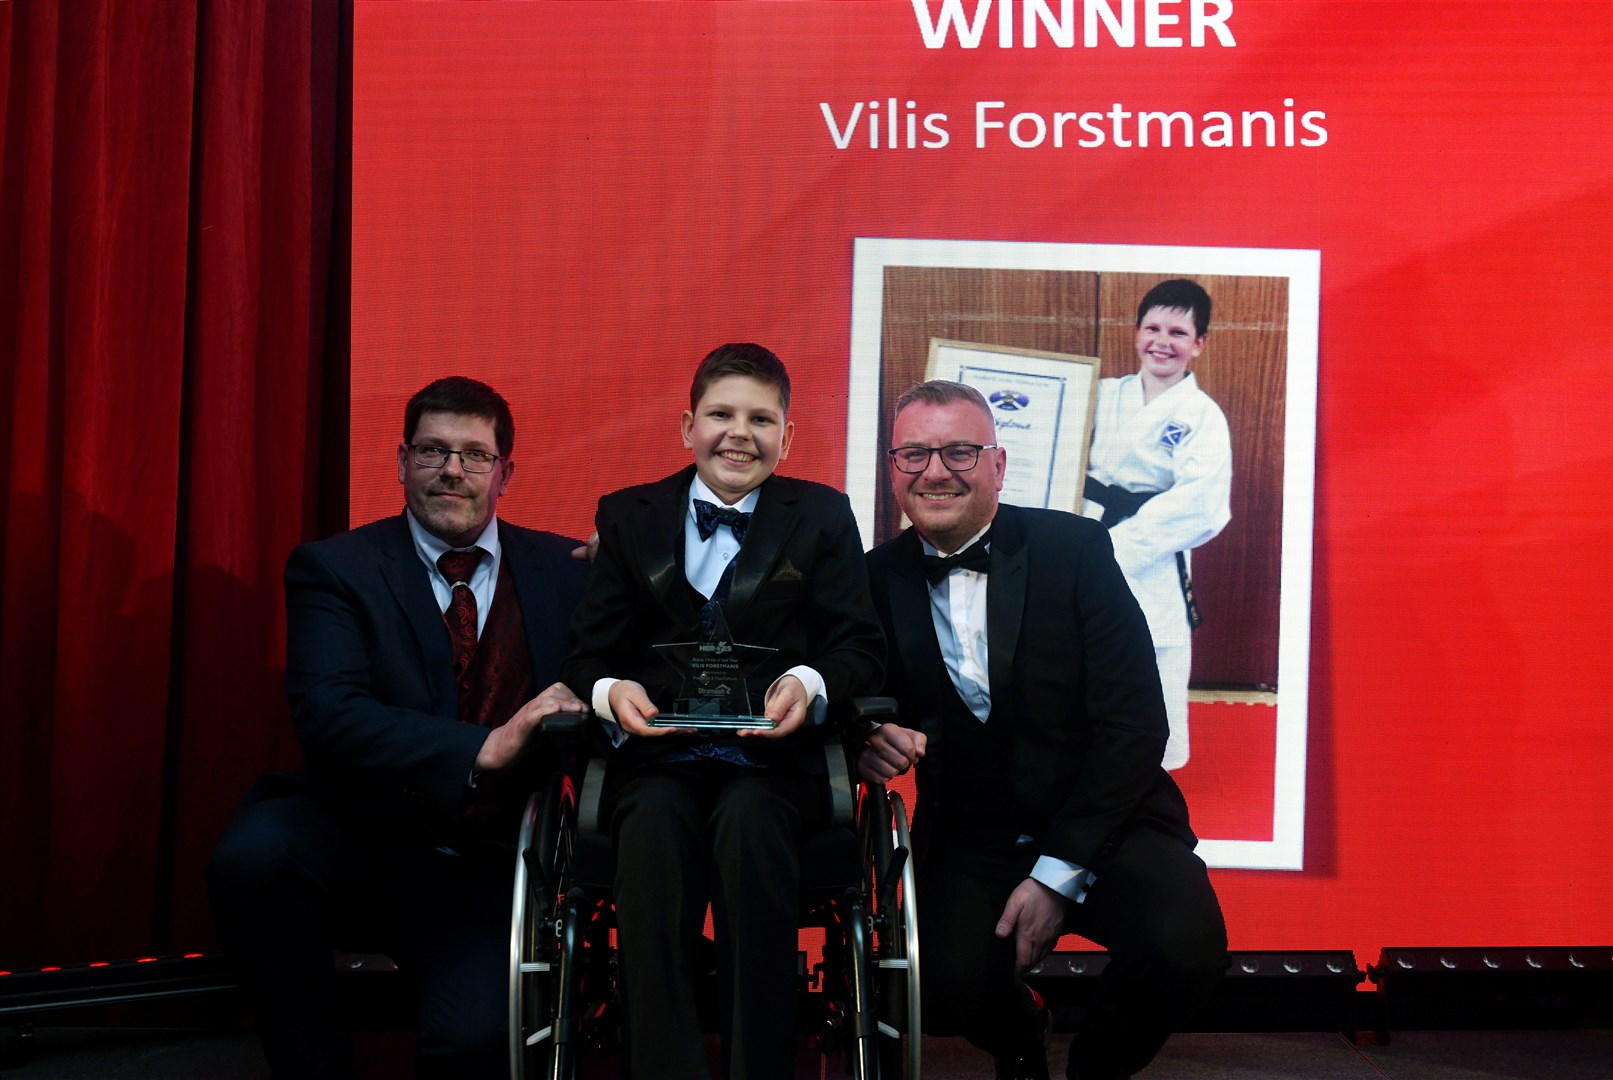 Vilis Forstmanis won the Brave Child award sponsored by Macleod and MacCallum.